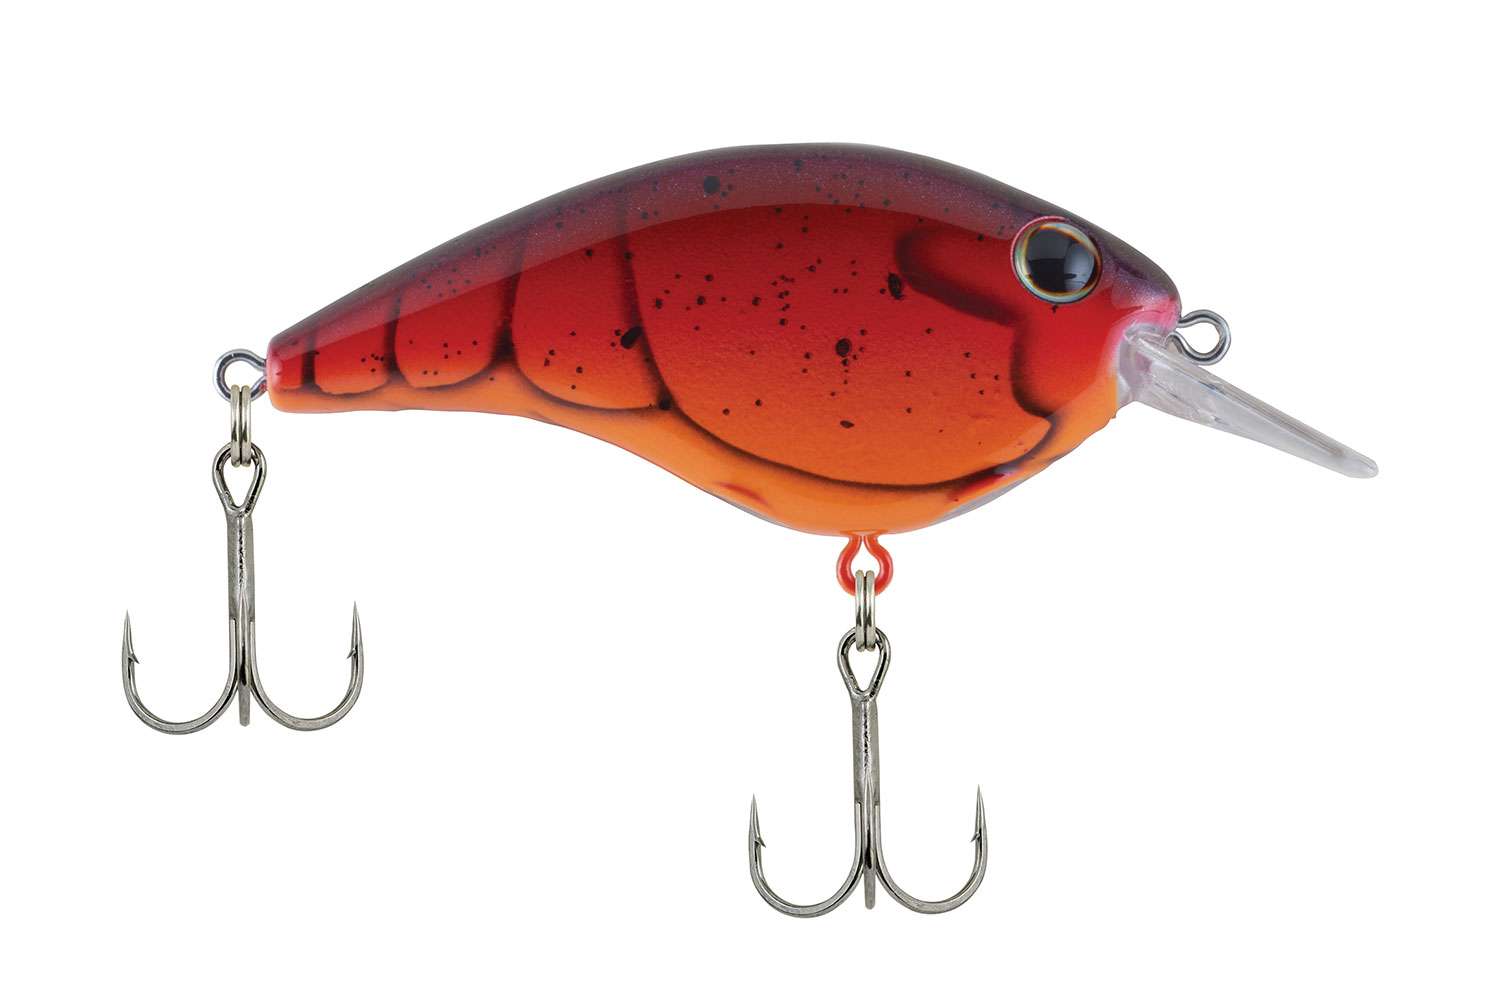 <B>Berkely Frittside</B><BR>
A take on a classic bait design with legendary crankbait angler David Fritts. The Berkley Frittside crankbait features the same proven action that won David the Bassmaster Classic. With proven balsa actions and the durability and casting performance of a plastic bait, the Frittside is a key bait for tough conditions when fish are sluggish or heavily pressured. Balanced weight design for improved tracking accuracy and a weighted bill on the 7 and 9 models to get deep fast. Available in 3 sizes. 
<BR>
    <b>MSRP: $8.99</b>